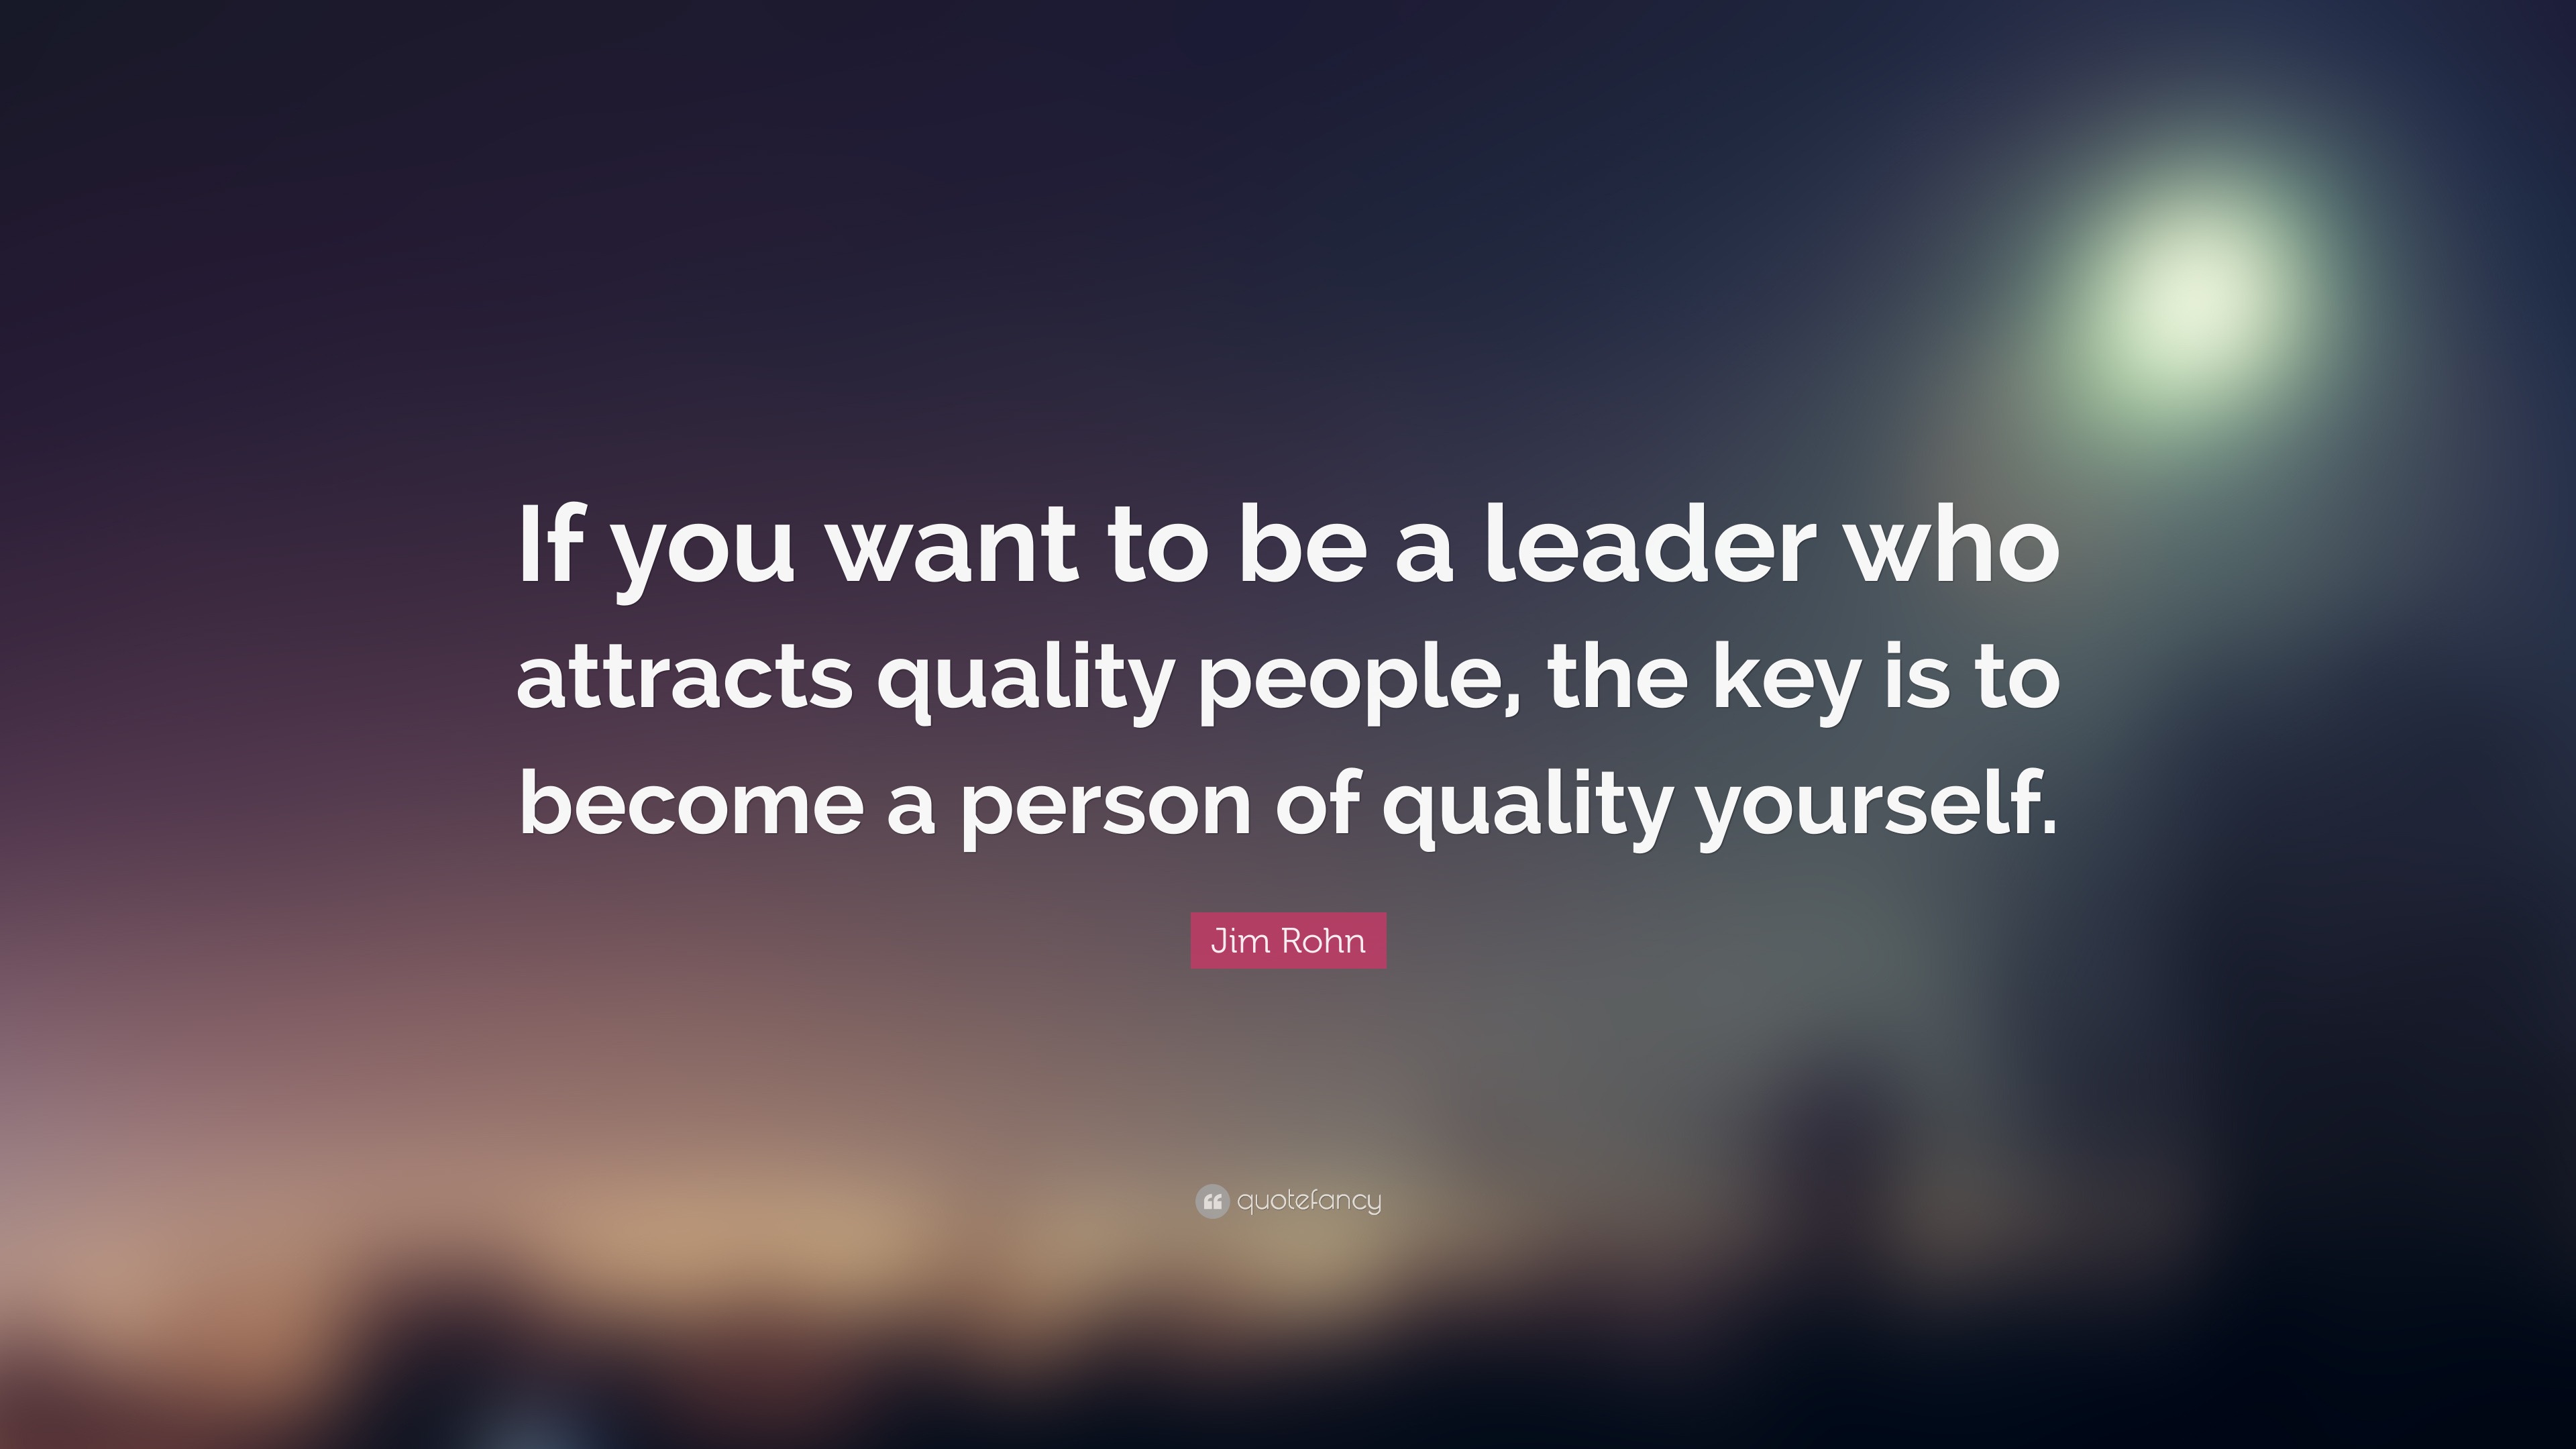 Jim Rohn Quote: “If you want to be a leader who attracts quality